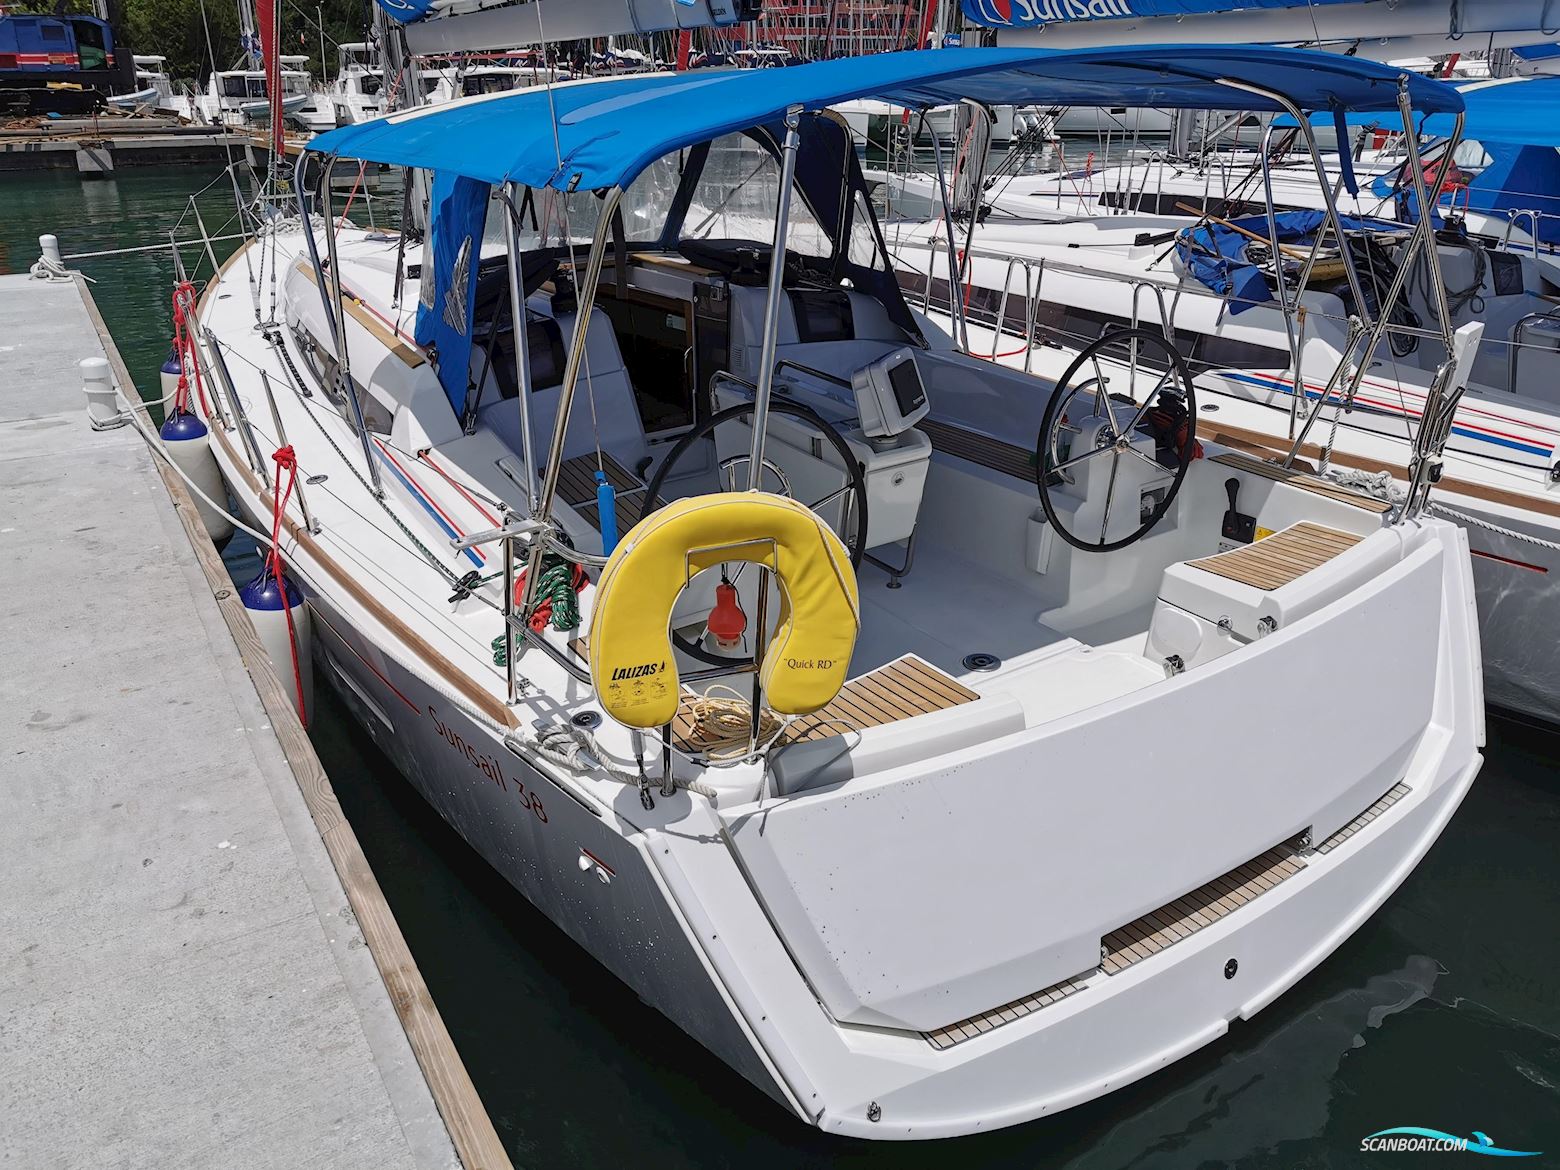 Jeanneau Sun Odyssey 389 Sailing boat 2018, with Yanmar engine, No country info